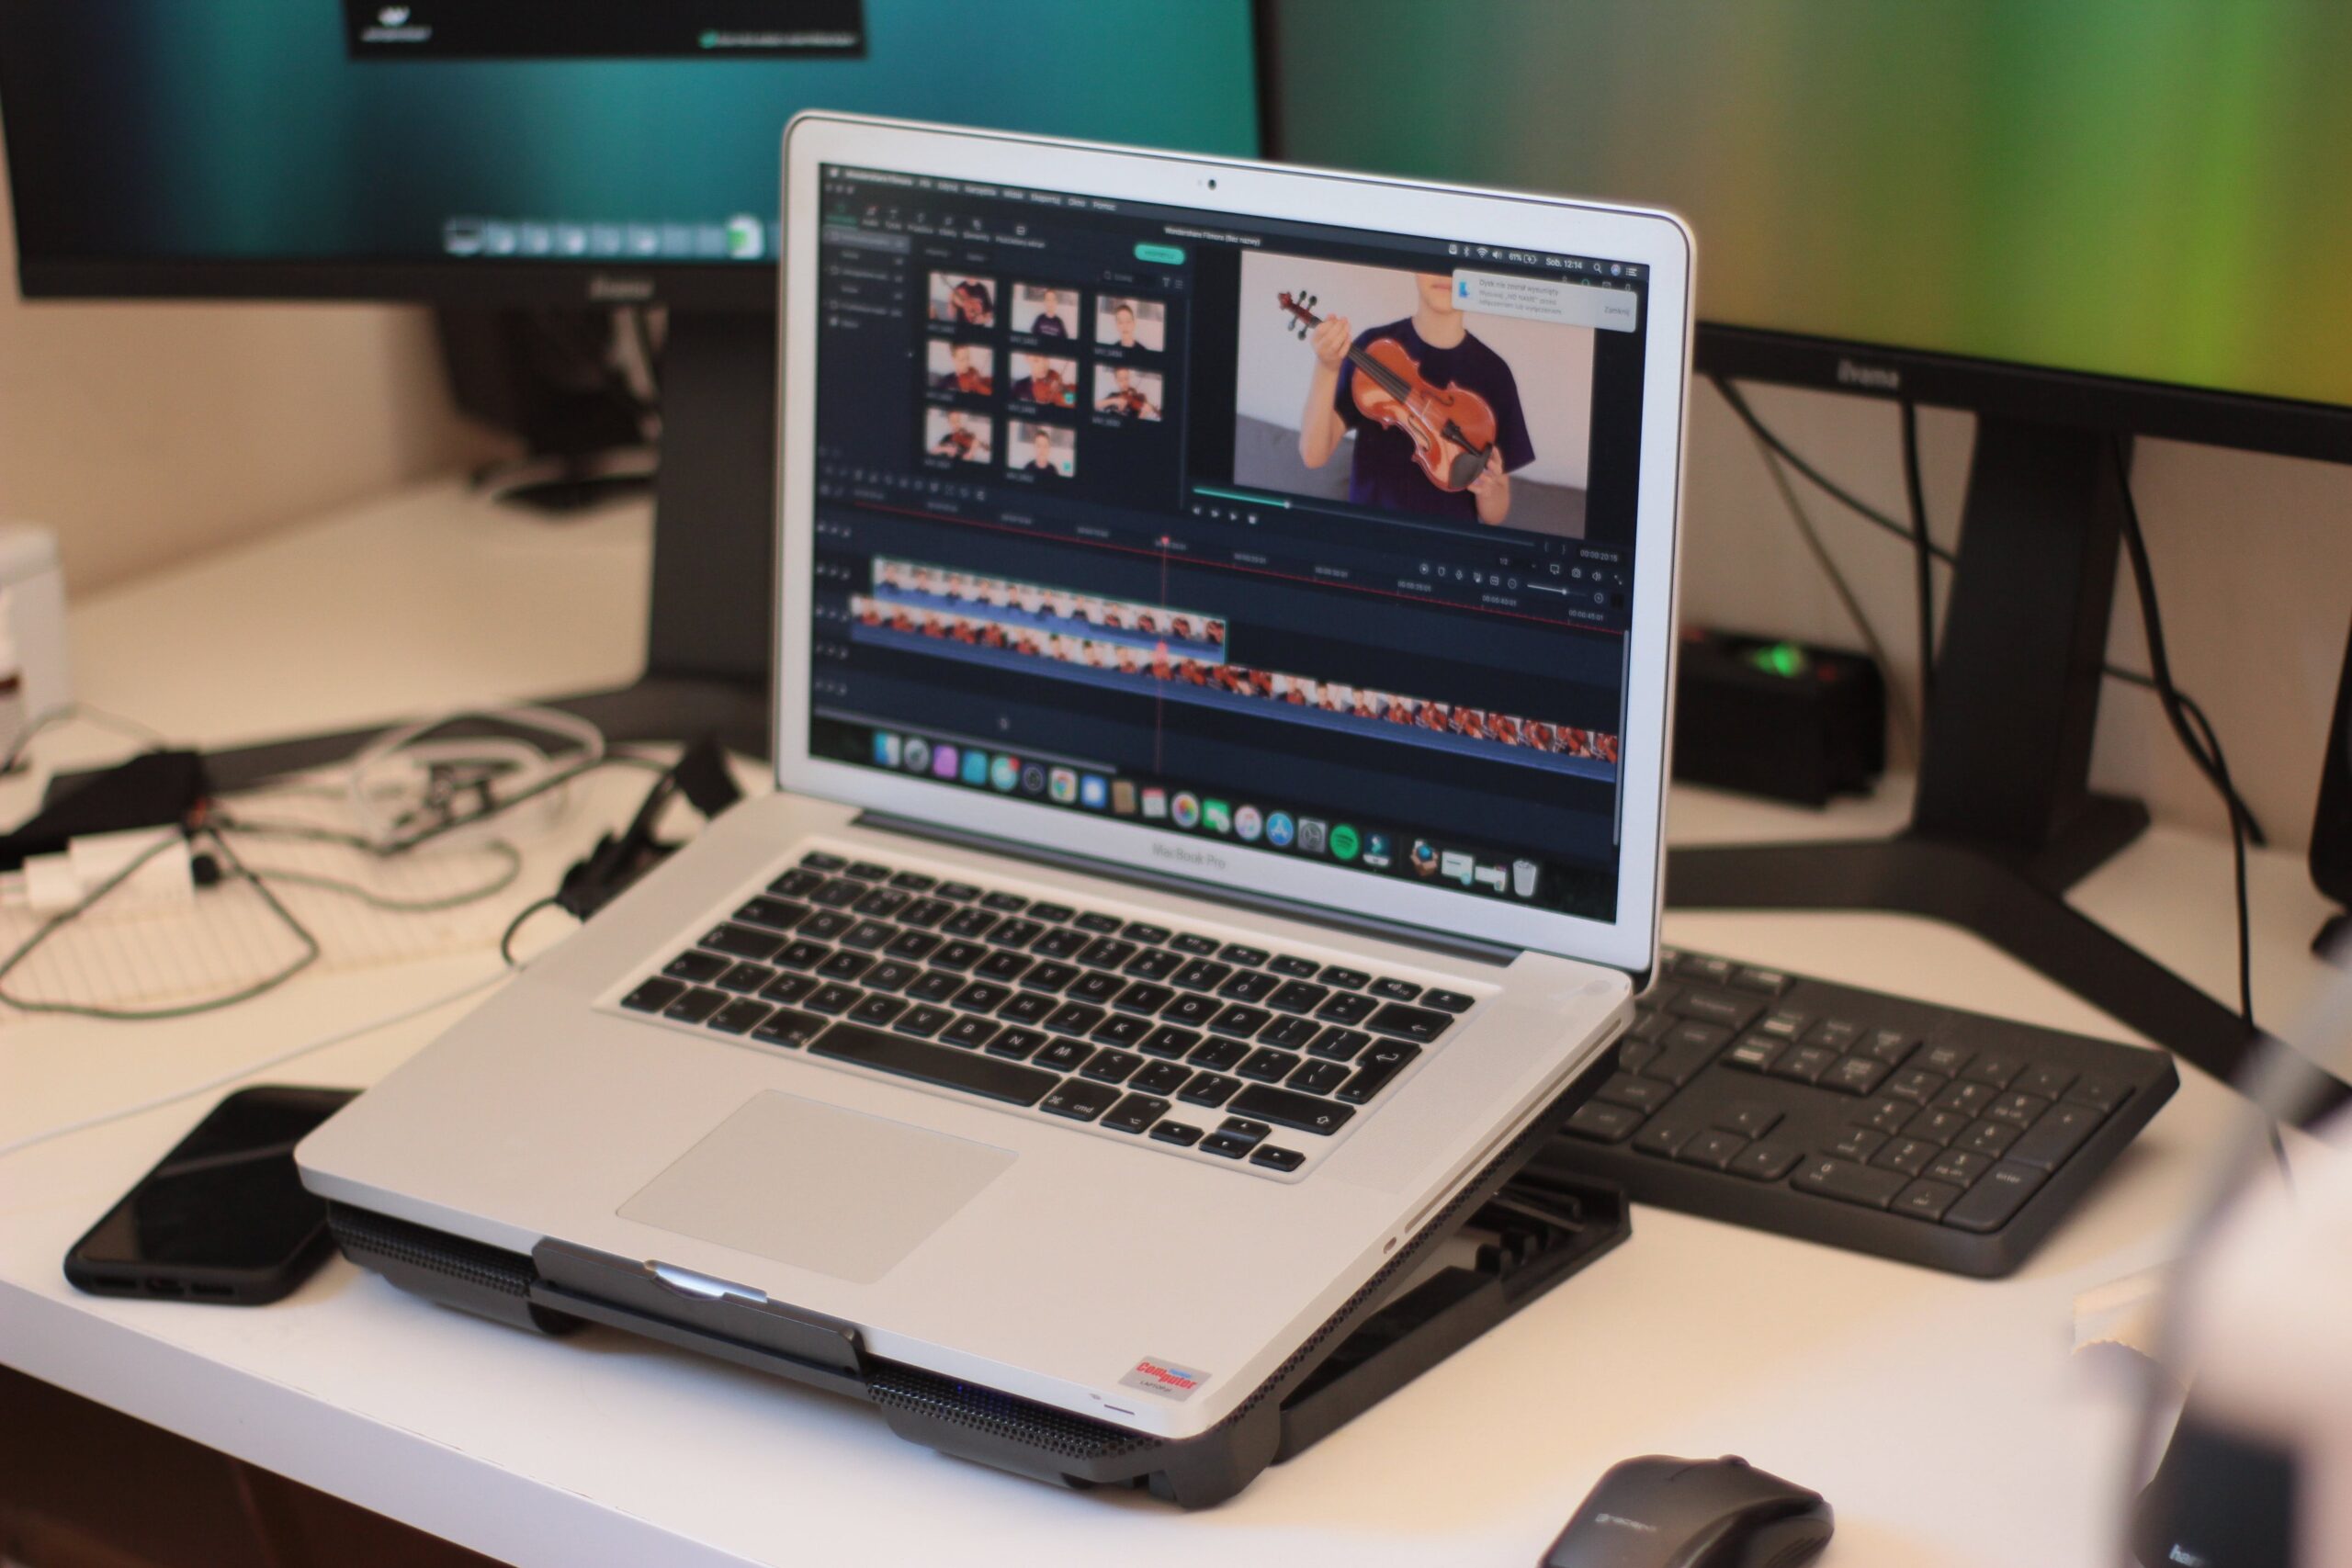 ## Best Video Editing Software for Laptops